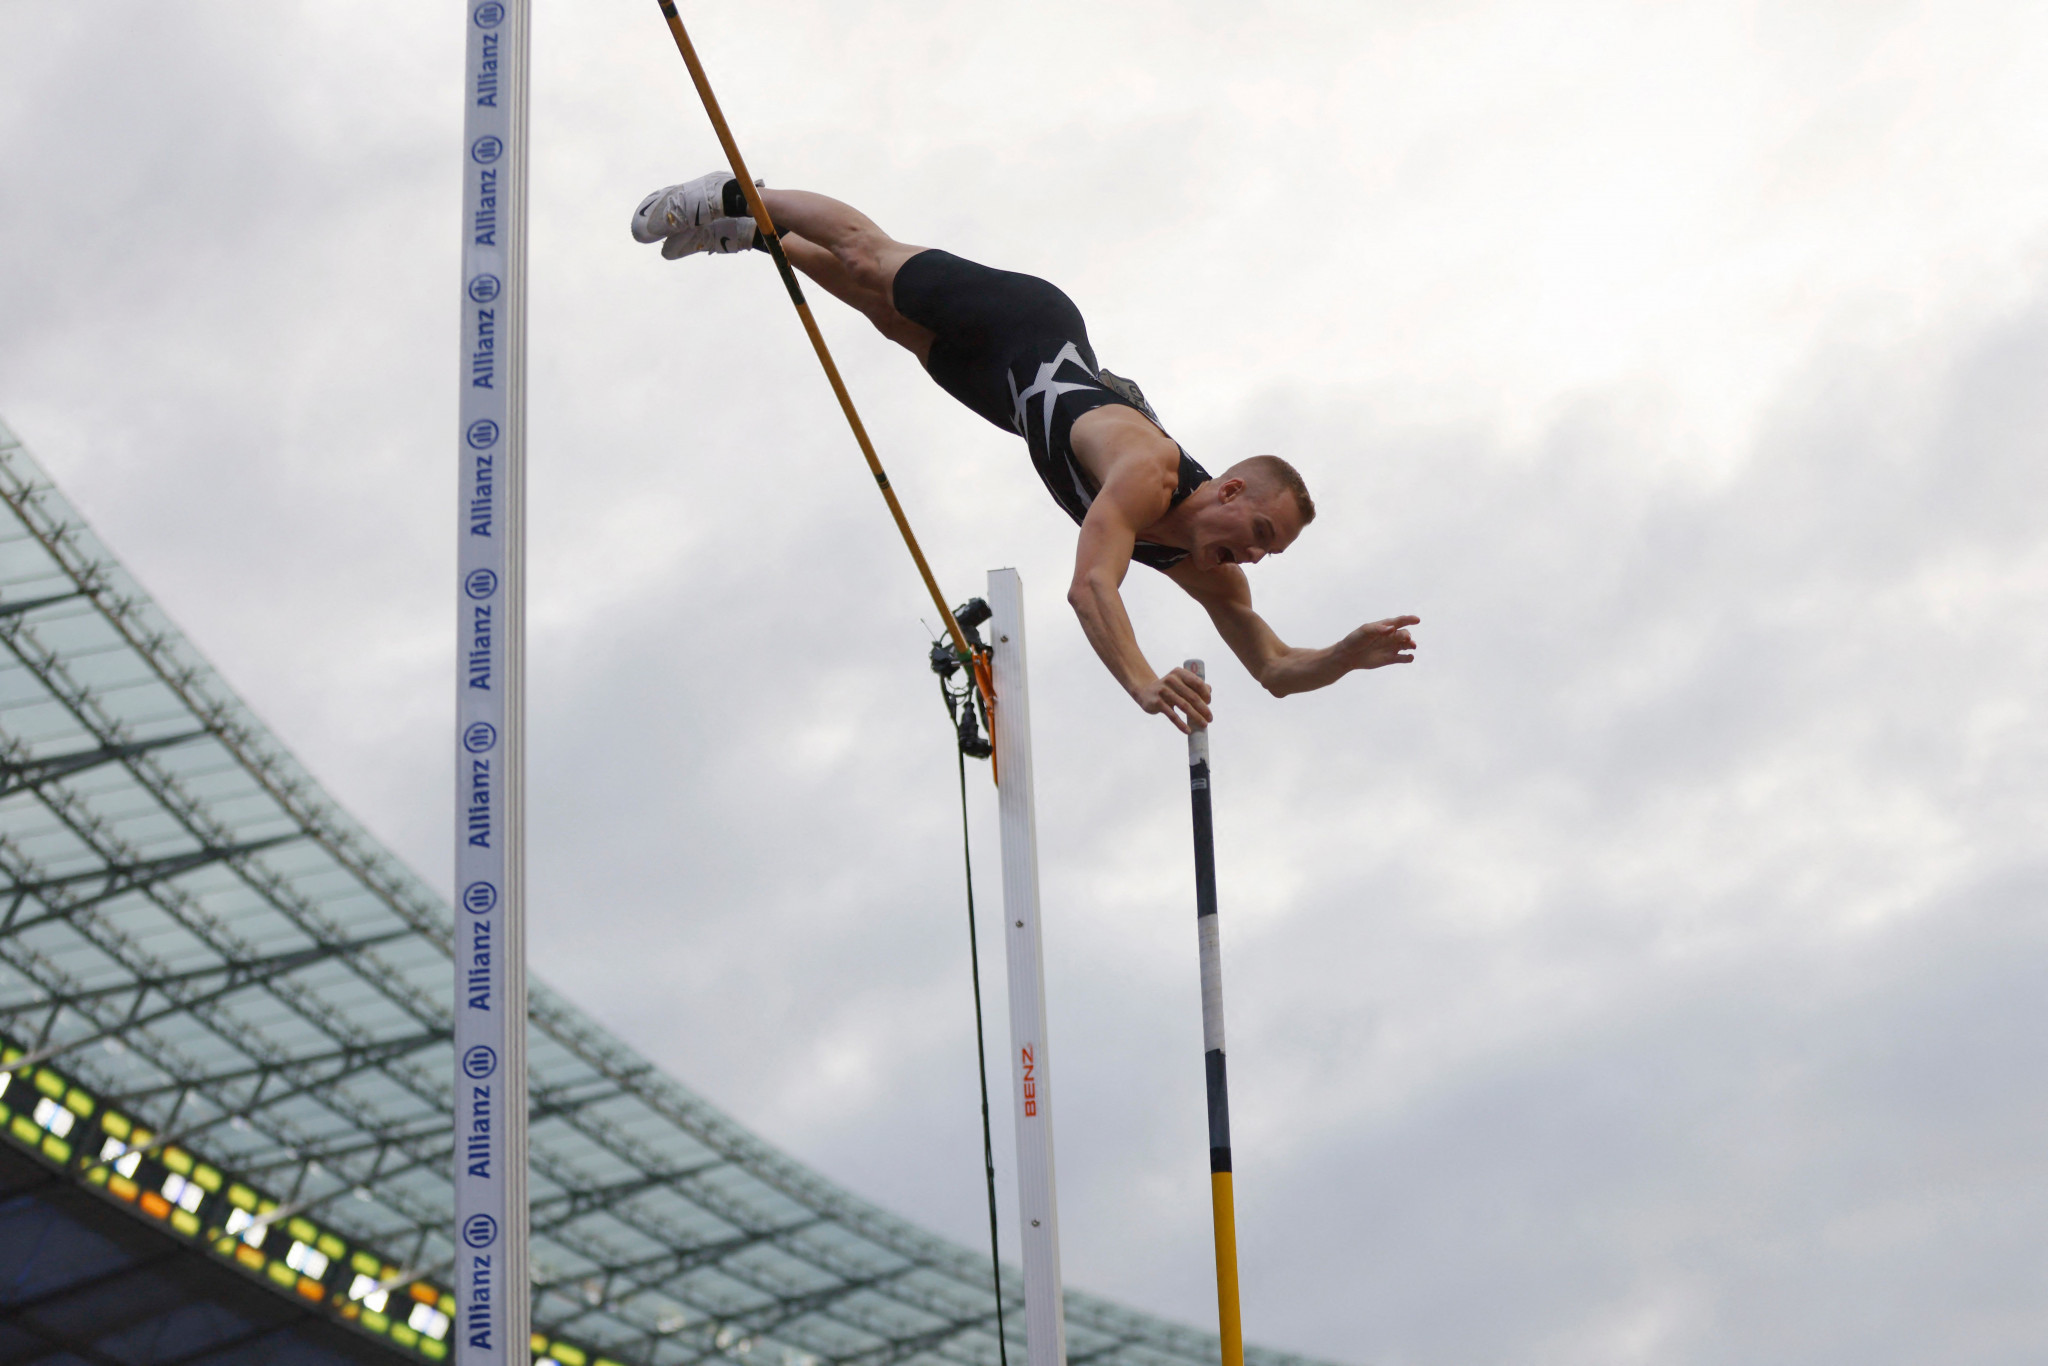 World pole vault champion Sam Kendricks was ruled of the Tokyo 2020 Olympics after testing positive for COVID-19 ©Getty Images